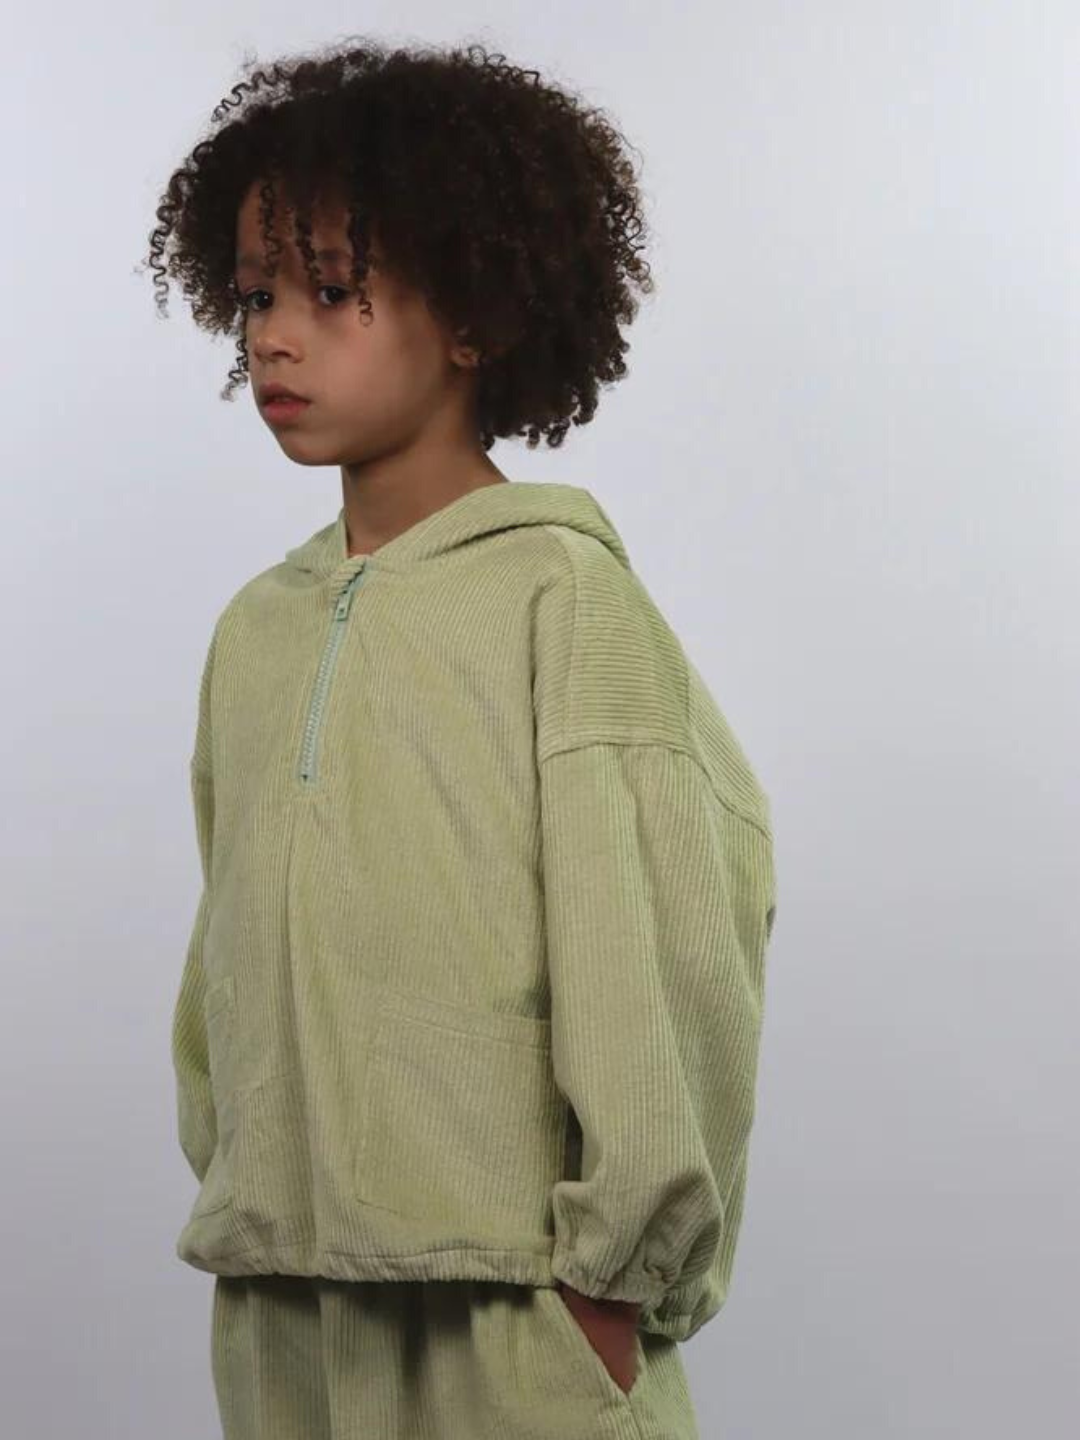 A child wearing a kids' hooded smock top in light pistachio green